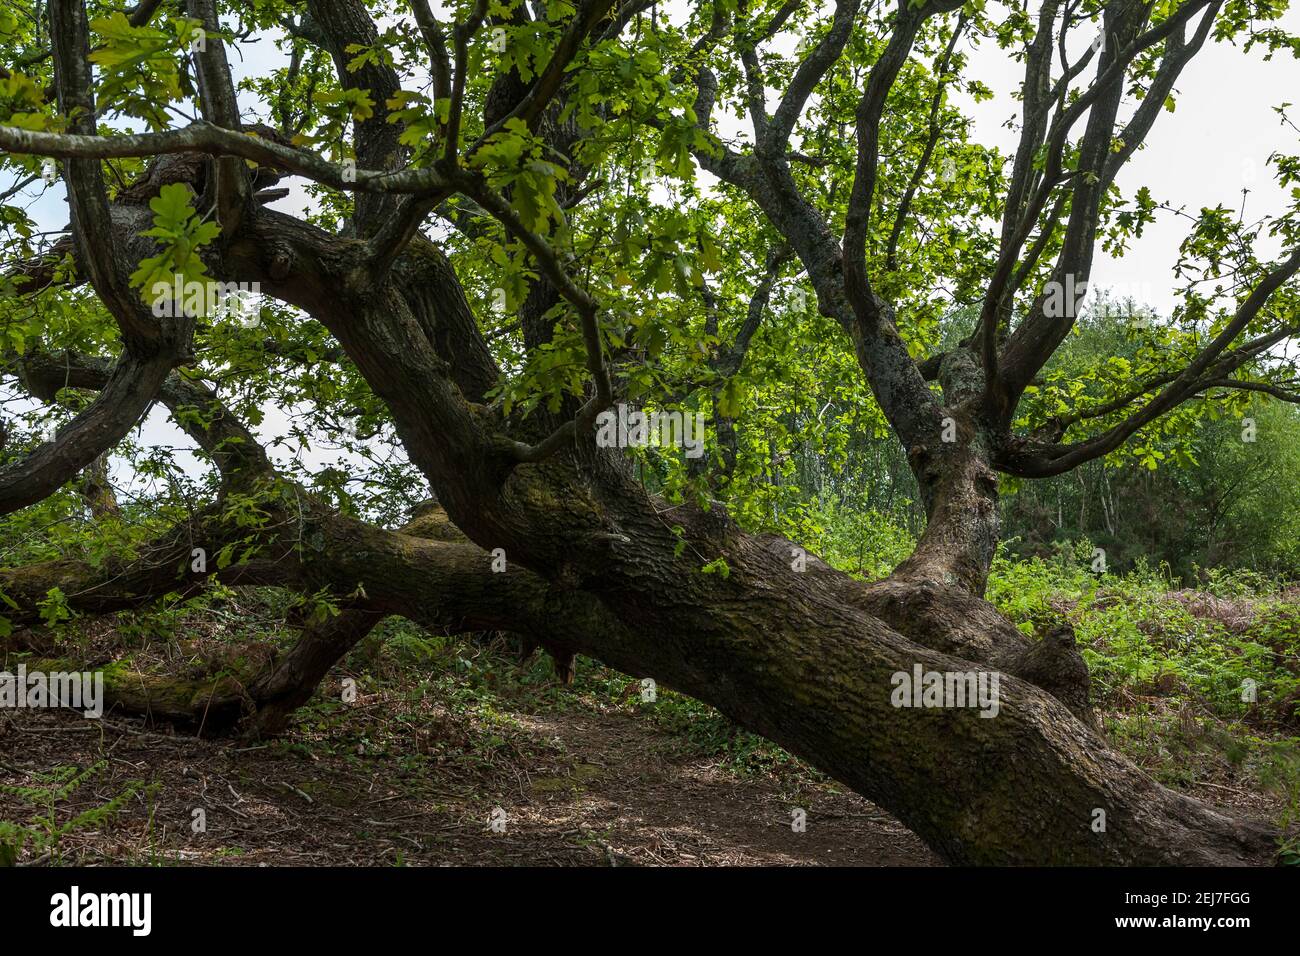 Oak tree (quercus), flattened by the Great Storm of 1987, but still alive and growing in 2020: Alver Valley, Gosport, Hampshire, UK Stock Photo